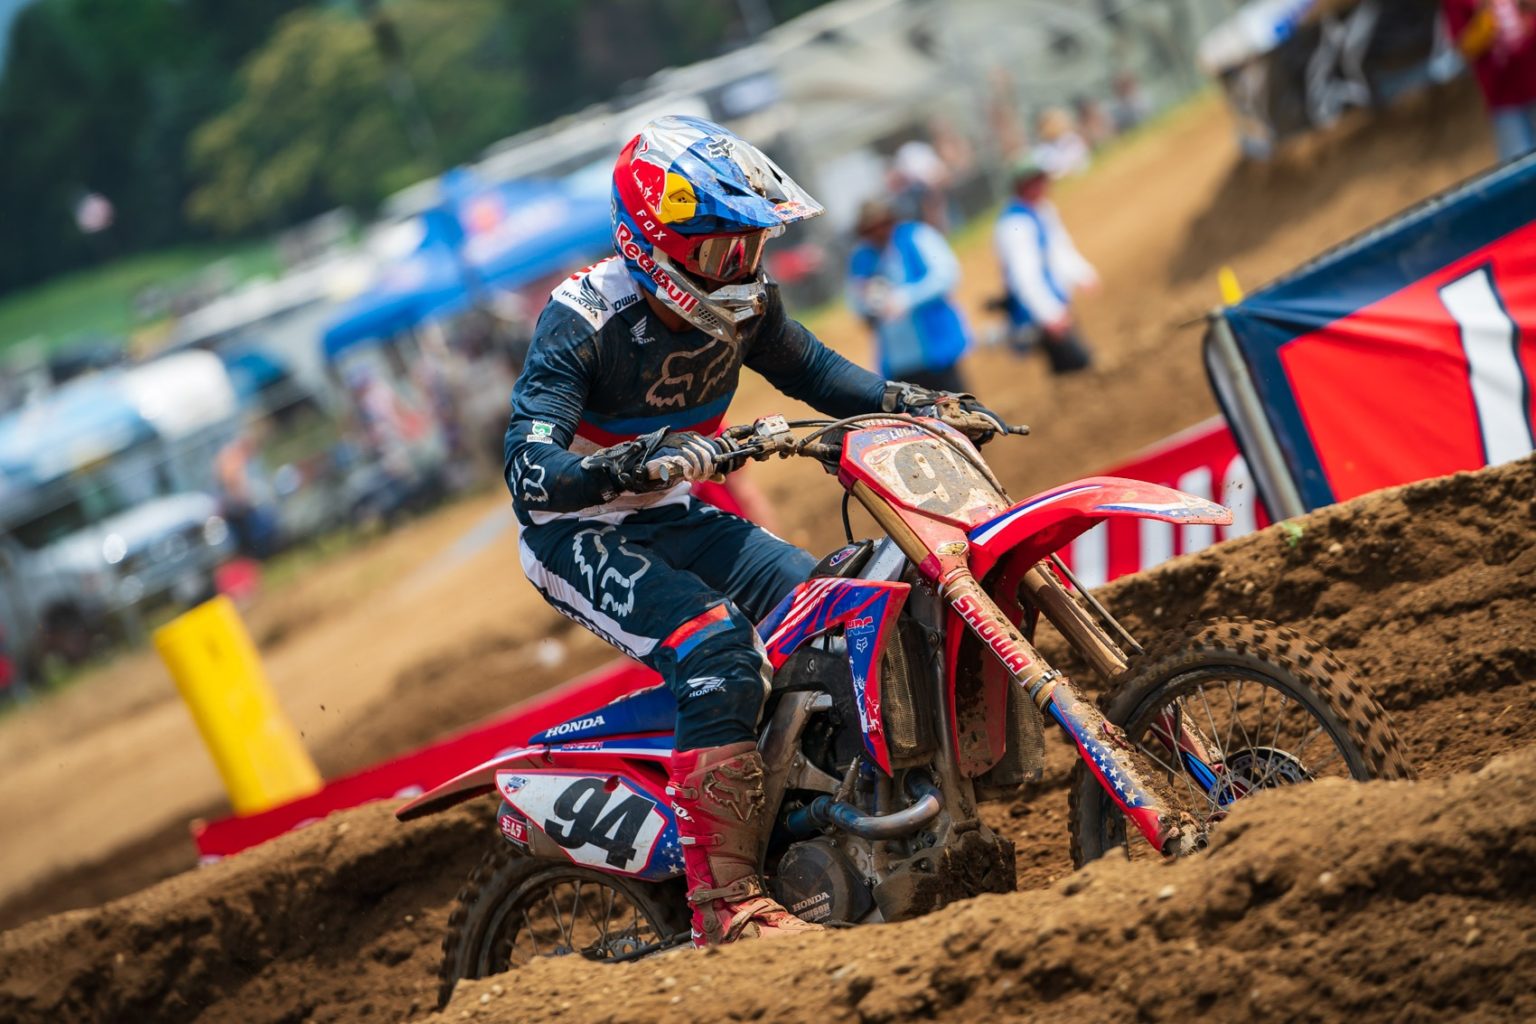 Pro Motocross 2020 Schedule Release Pushed Back Swapmoto Live